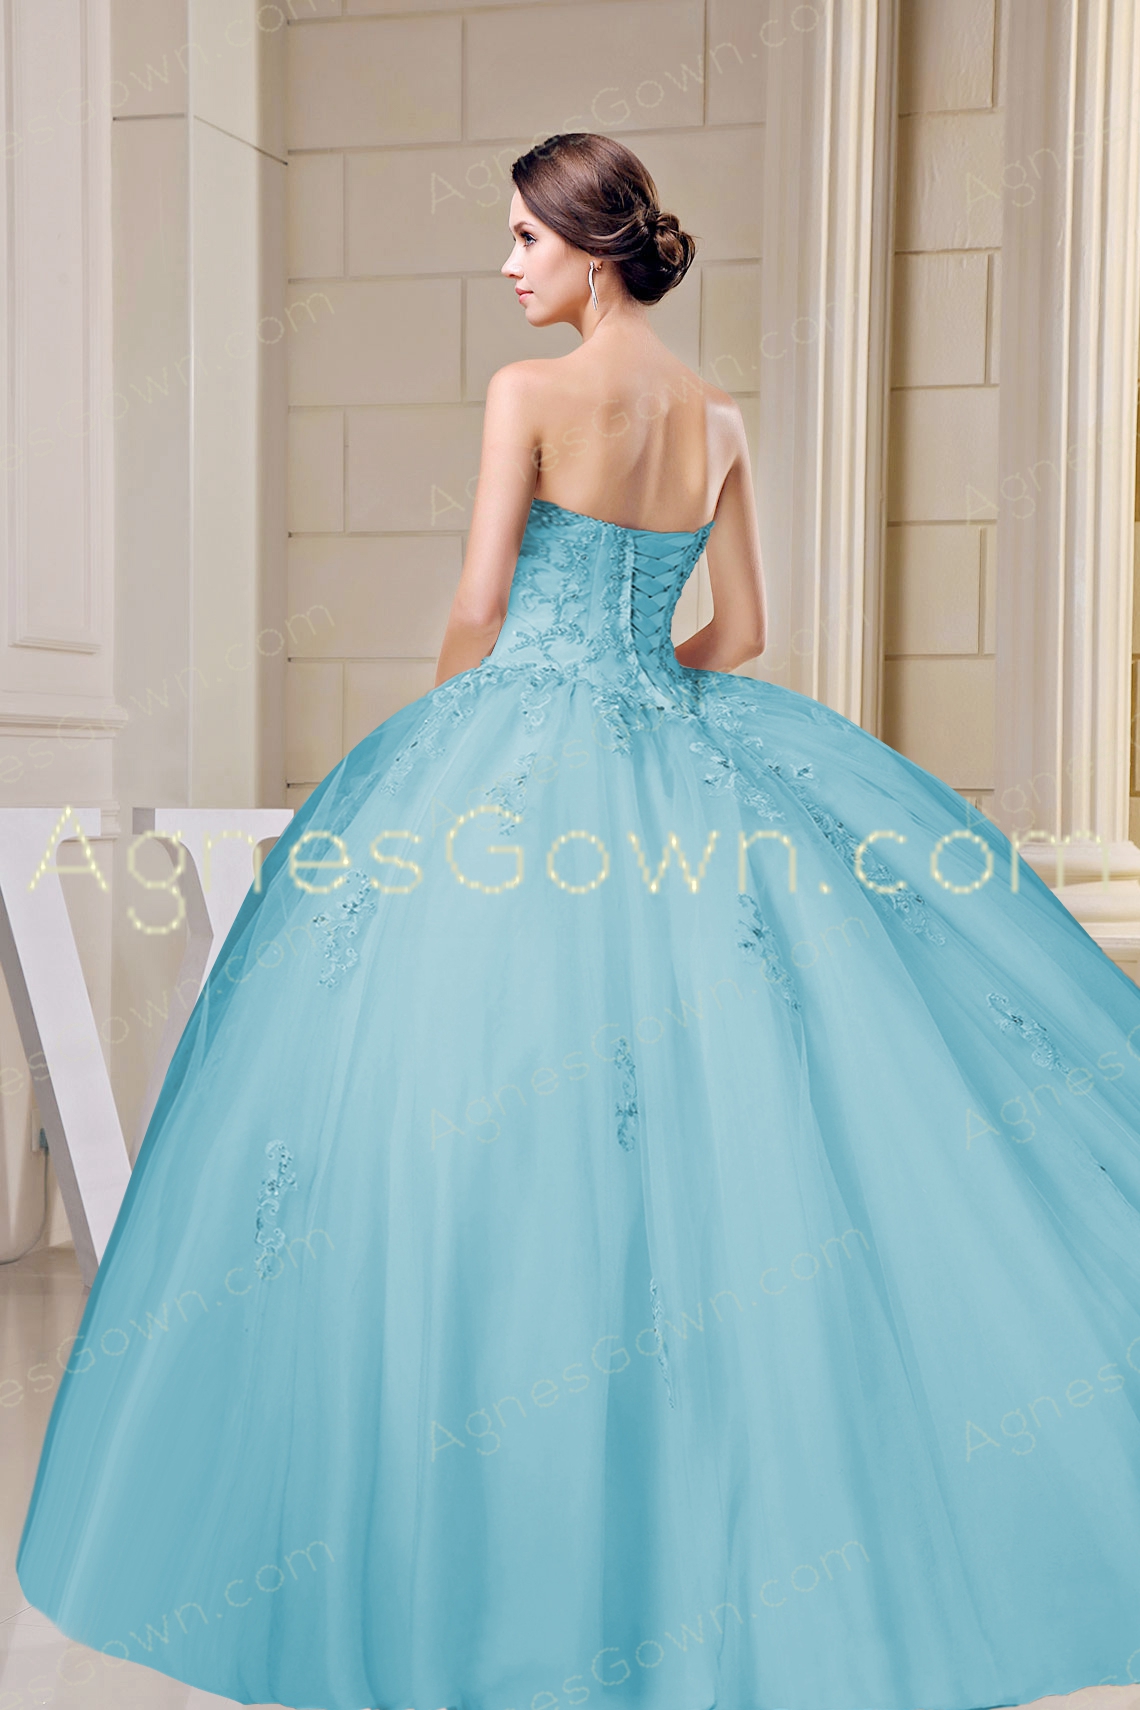 Exquisite Ball Gown Blue Quinceanera Dress 